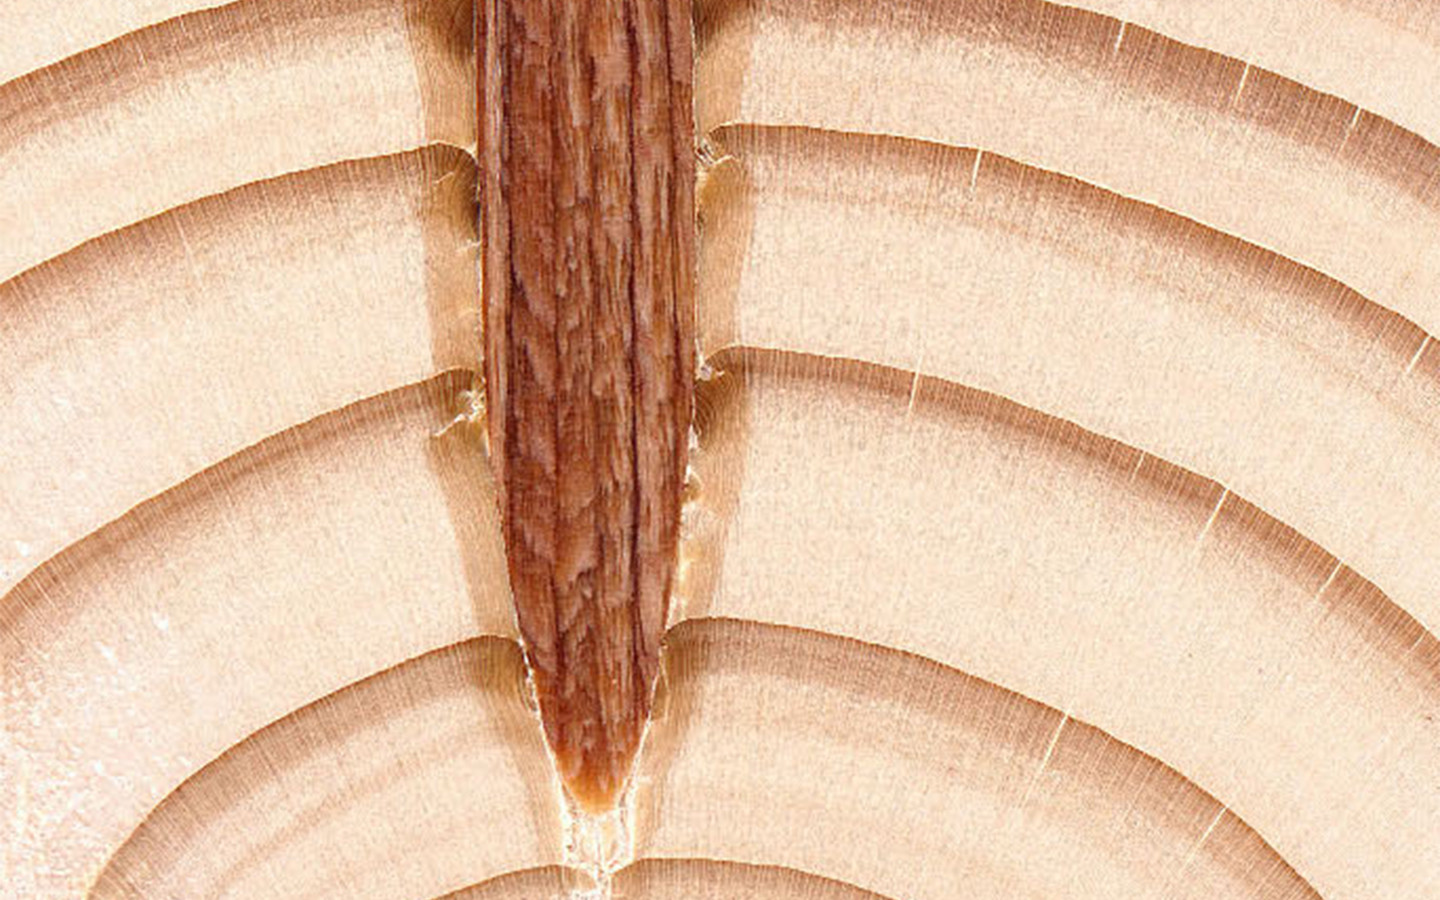 LignoLoc® - Collated Wooden Nail System